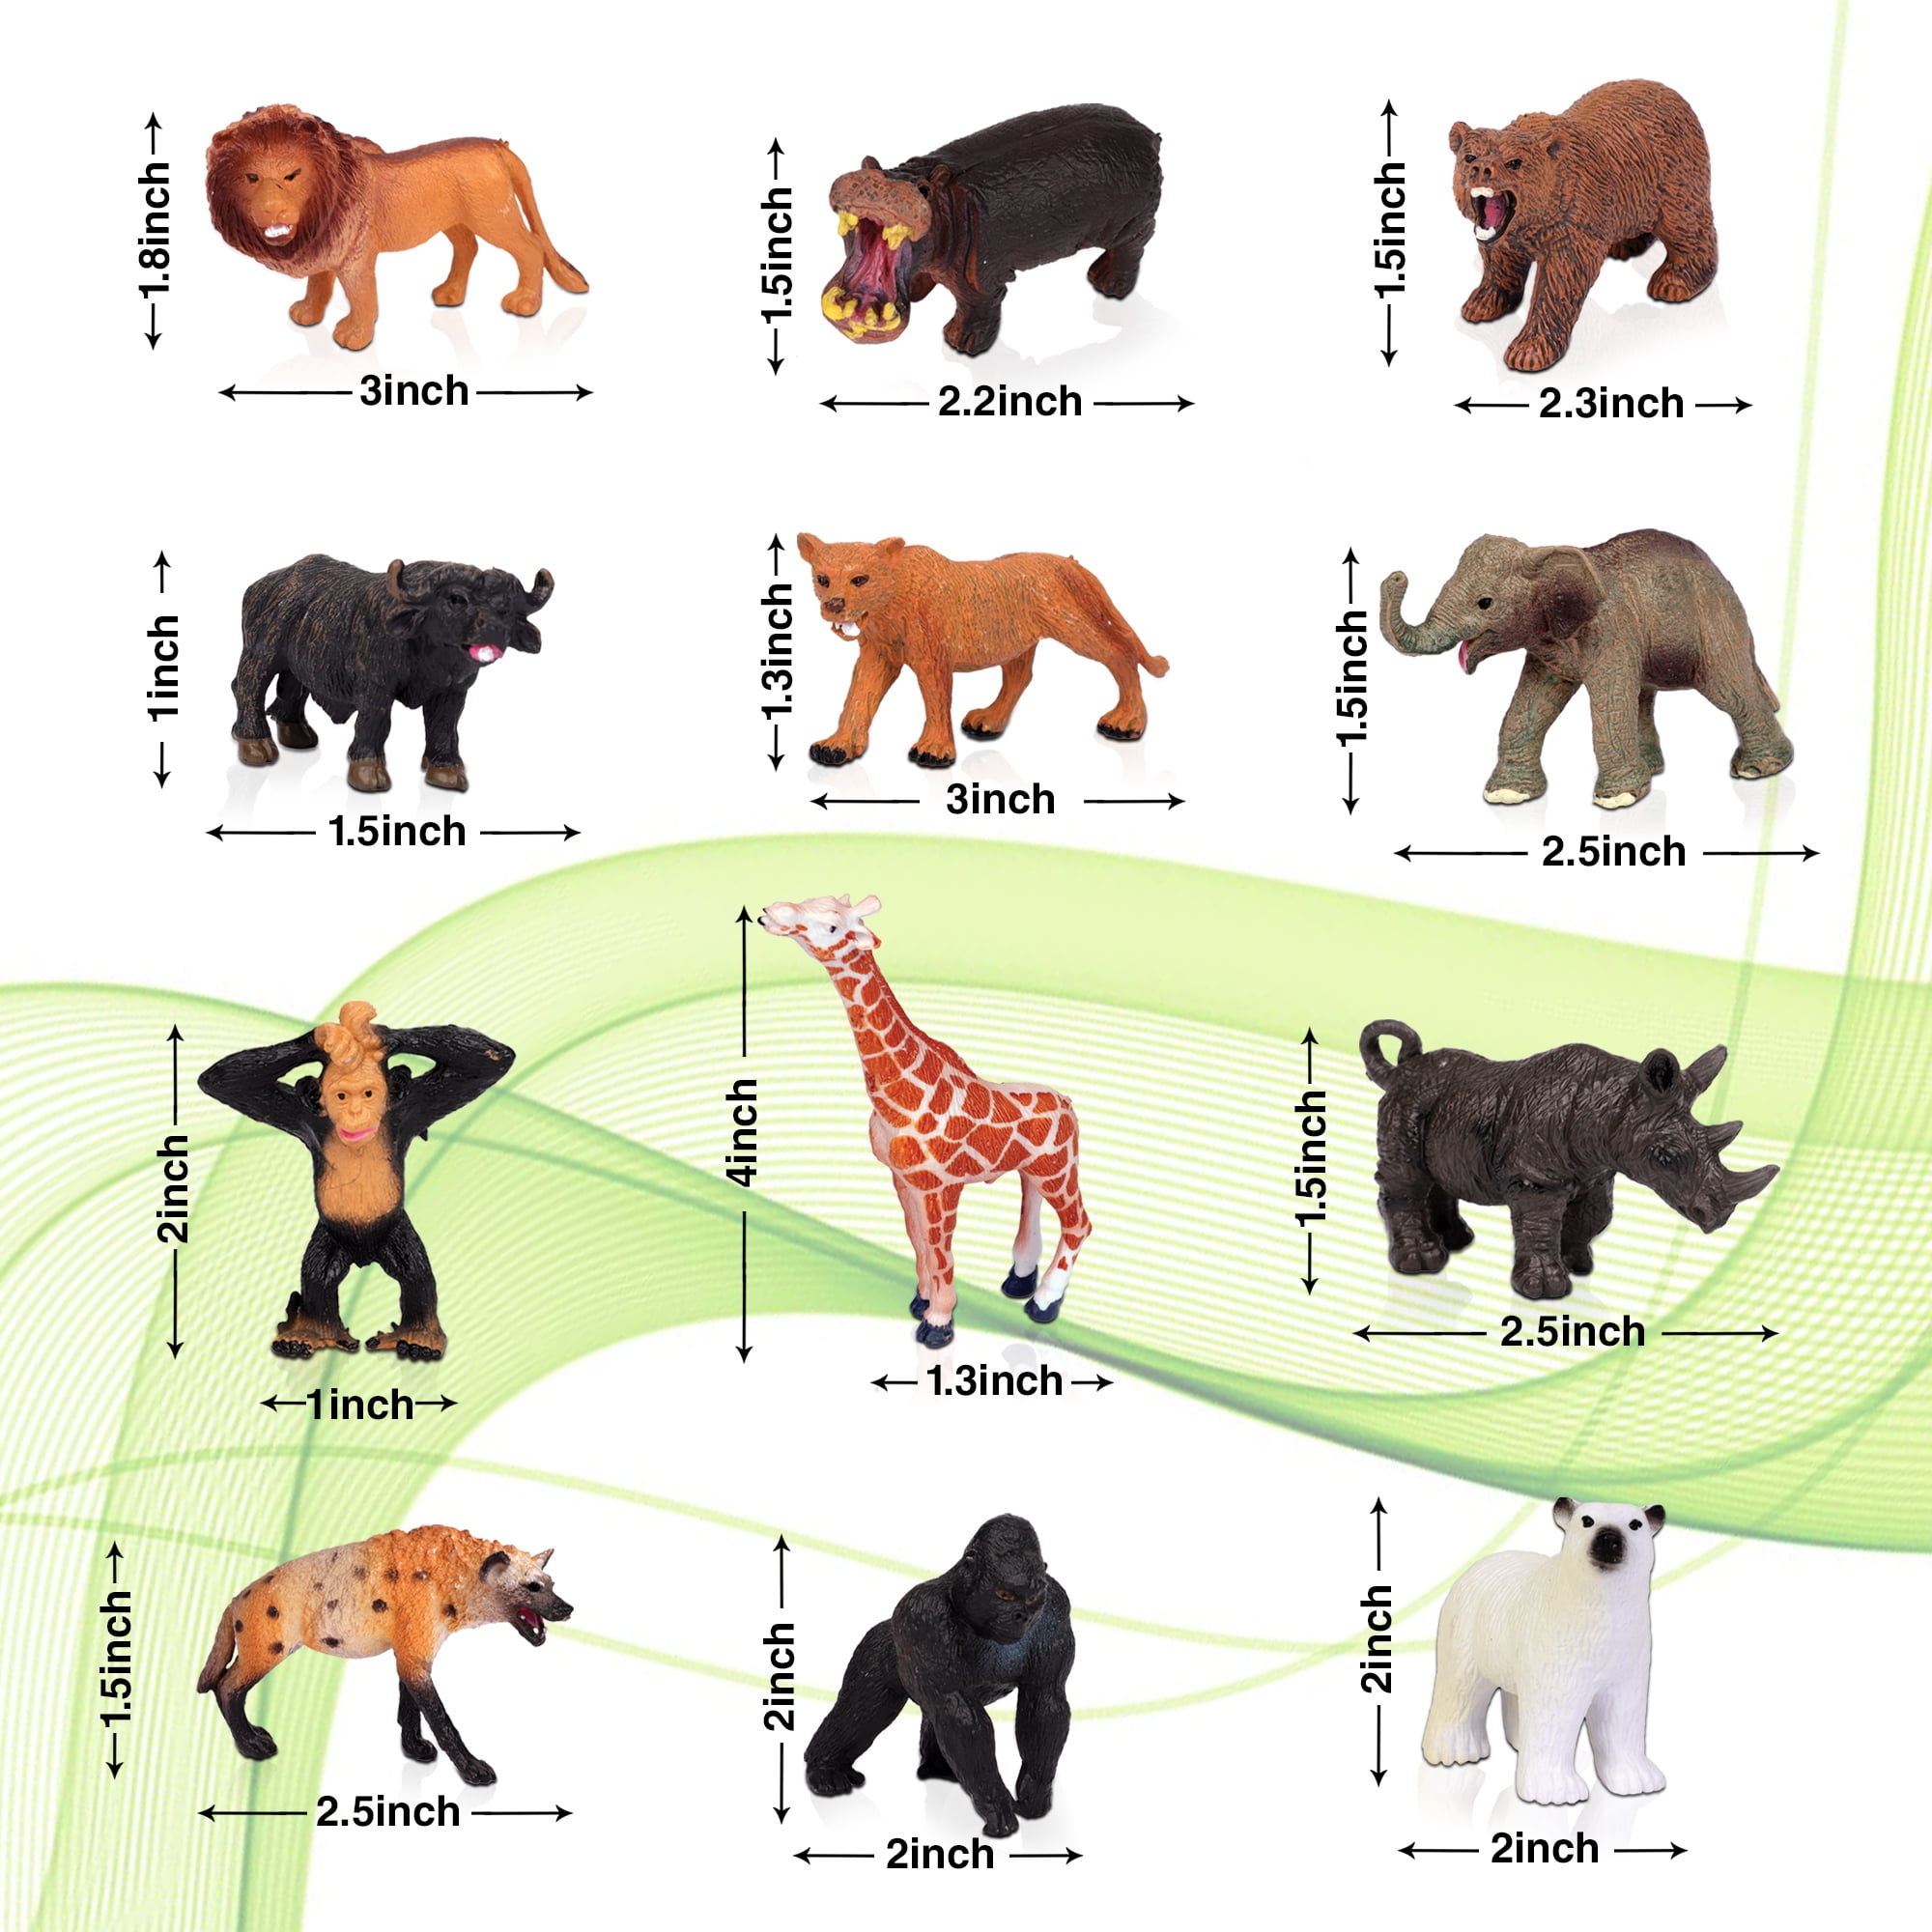 KarberDark Animal Toy 64 Pack Mini Wild Plastic Animals Models Toys Kit Jungle Realistic Animal Figure Set for Children Kids Boy Girl Party Favors Educational Toy Birthday Game Classrooms Rewards 